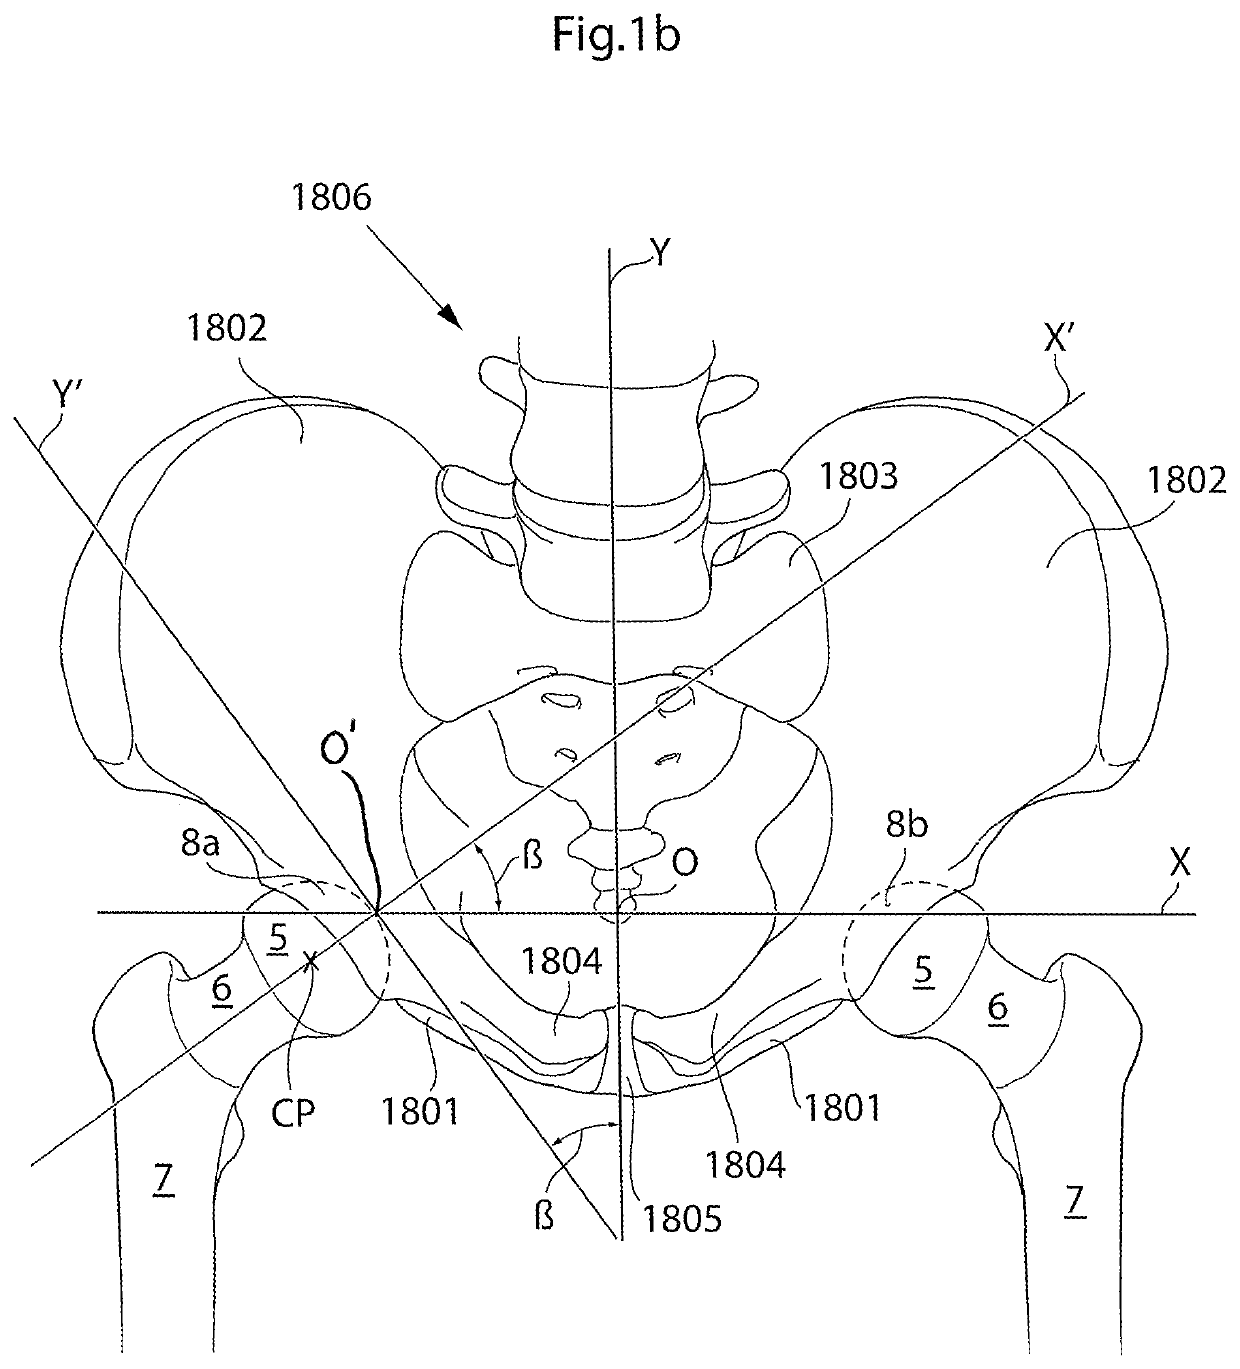 Hip joint device